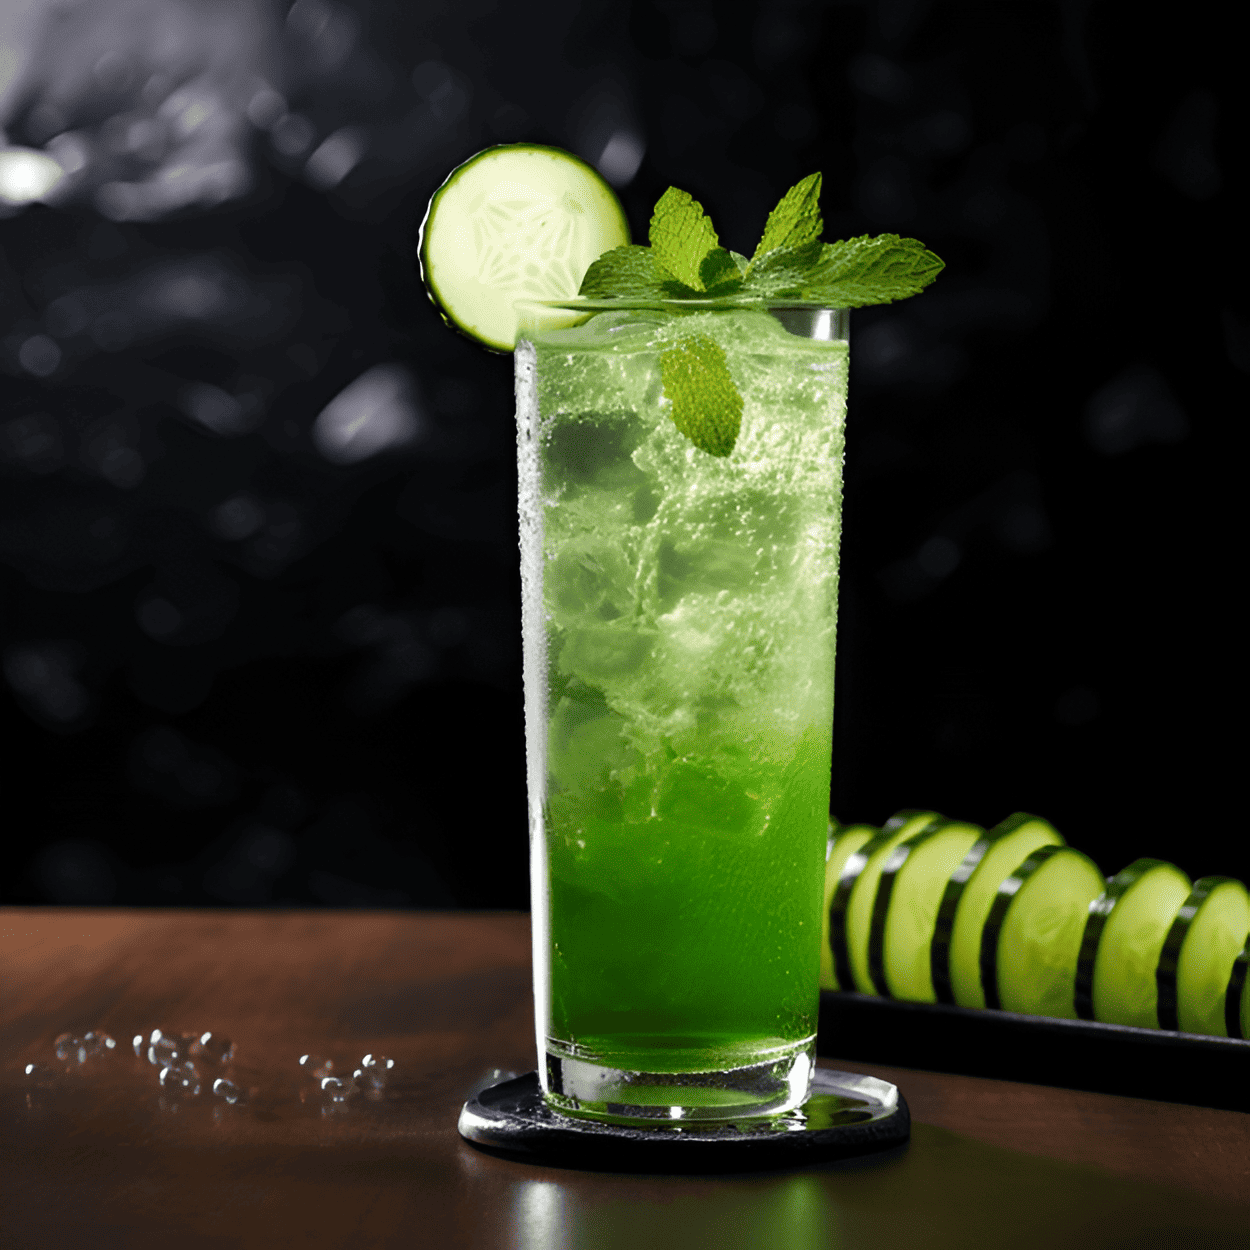 Pepino's Revenge Cocktail Recipe - The Pepino's Revenge is a refreshing, light, and crisp cocktail. It has a dominant cucumber taste, with a hint of lime and a subtle kick from the jalapeno. The tequila adds a depth of flavor, making it a well-rounded and balanced drink.